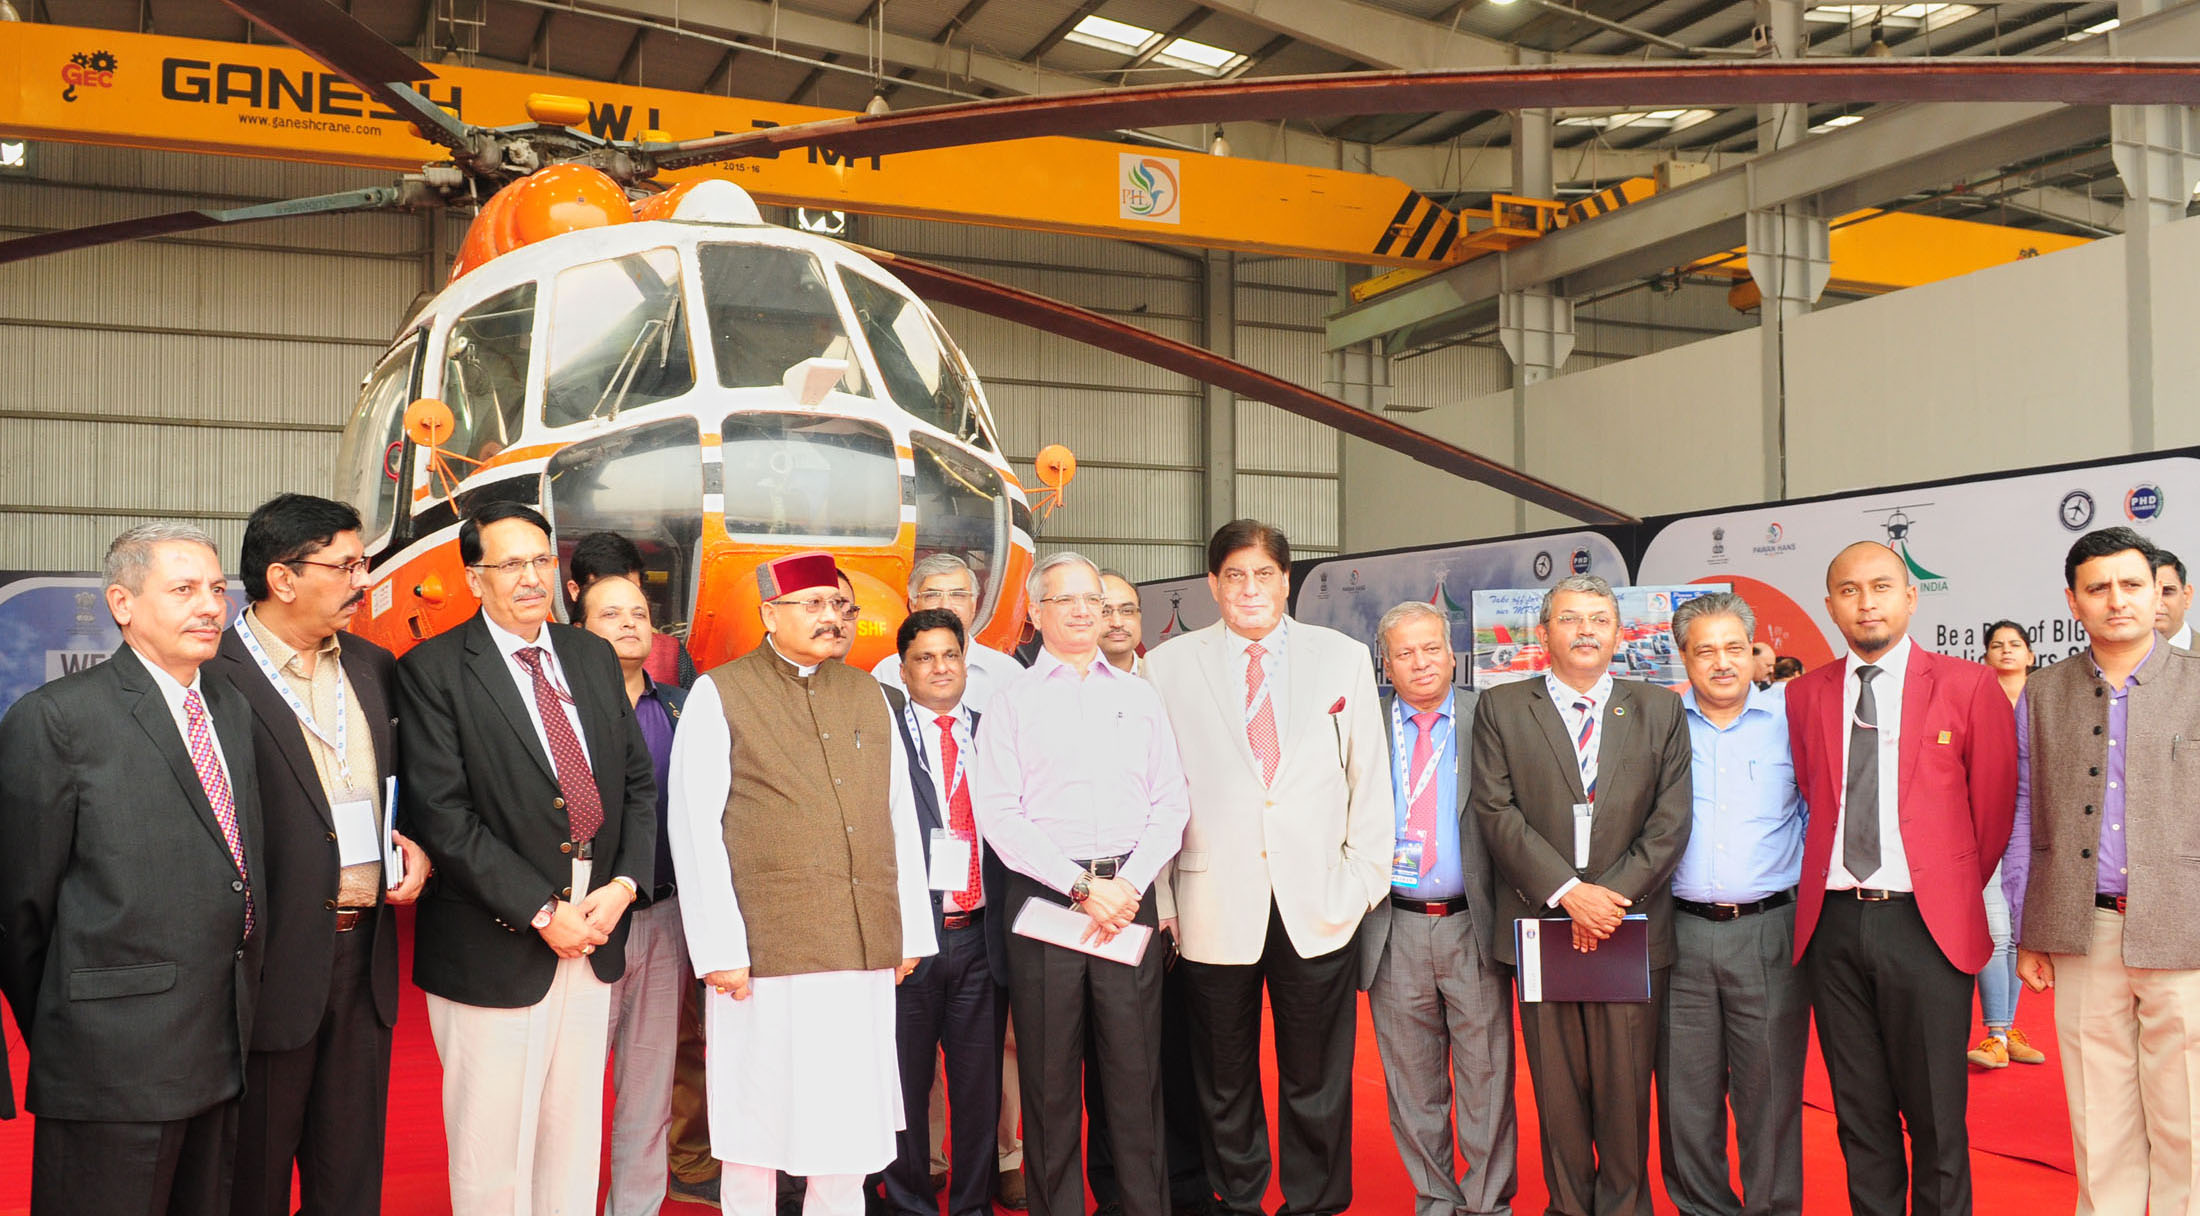 The Tourism Minister of Uttarakhand, Shri Satpal Maharaj and the Secretary, Ministry of Civil Aviation, Shri R.N. Choubey at the inauguration of the 1st Heli Expo India & International Civil Helicopter Conclave - 2017, in New Delhi on November 04, 2017.